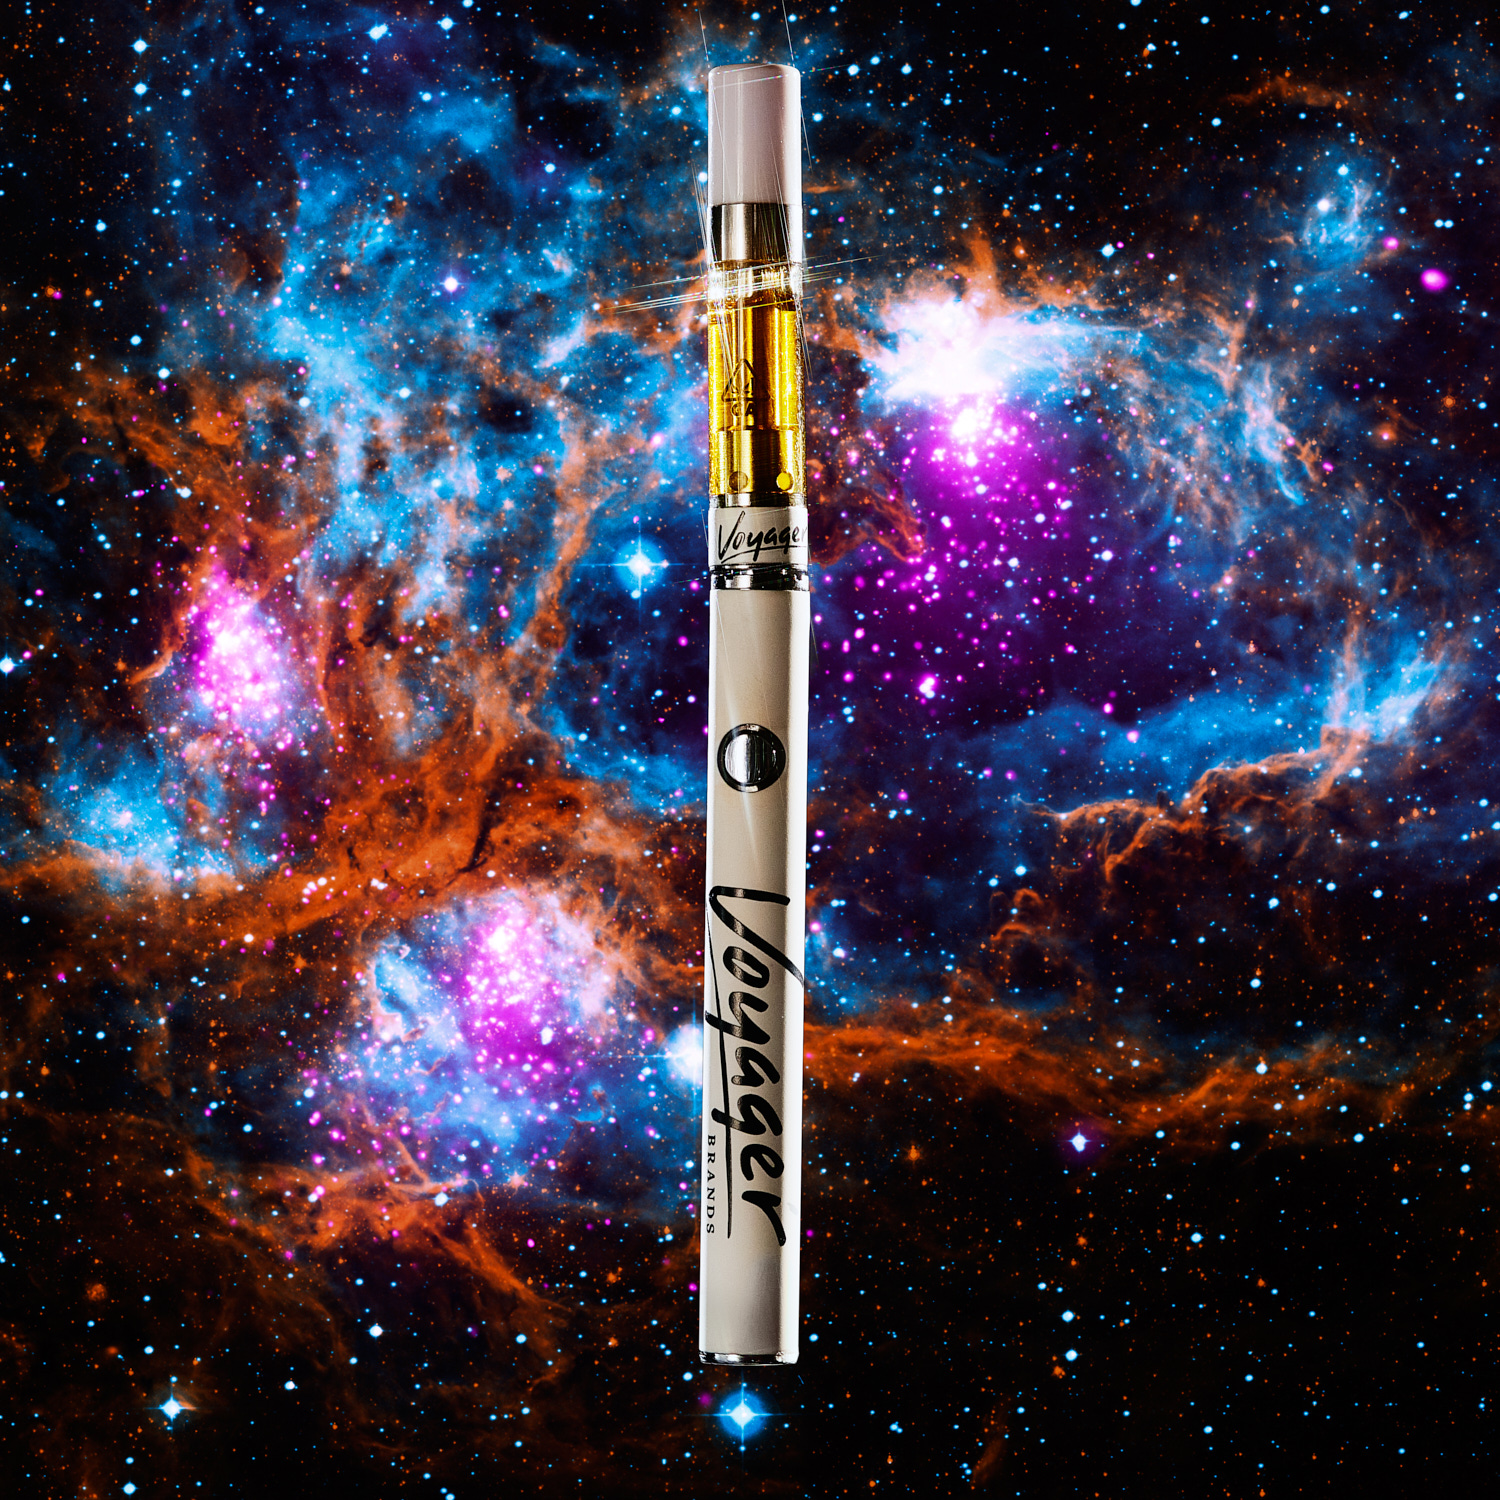 Voyager Brand Vape Pen in the galaxy background